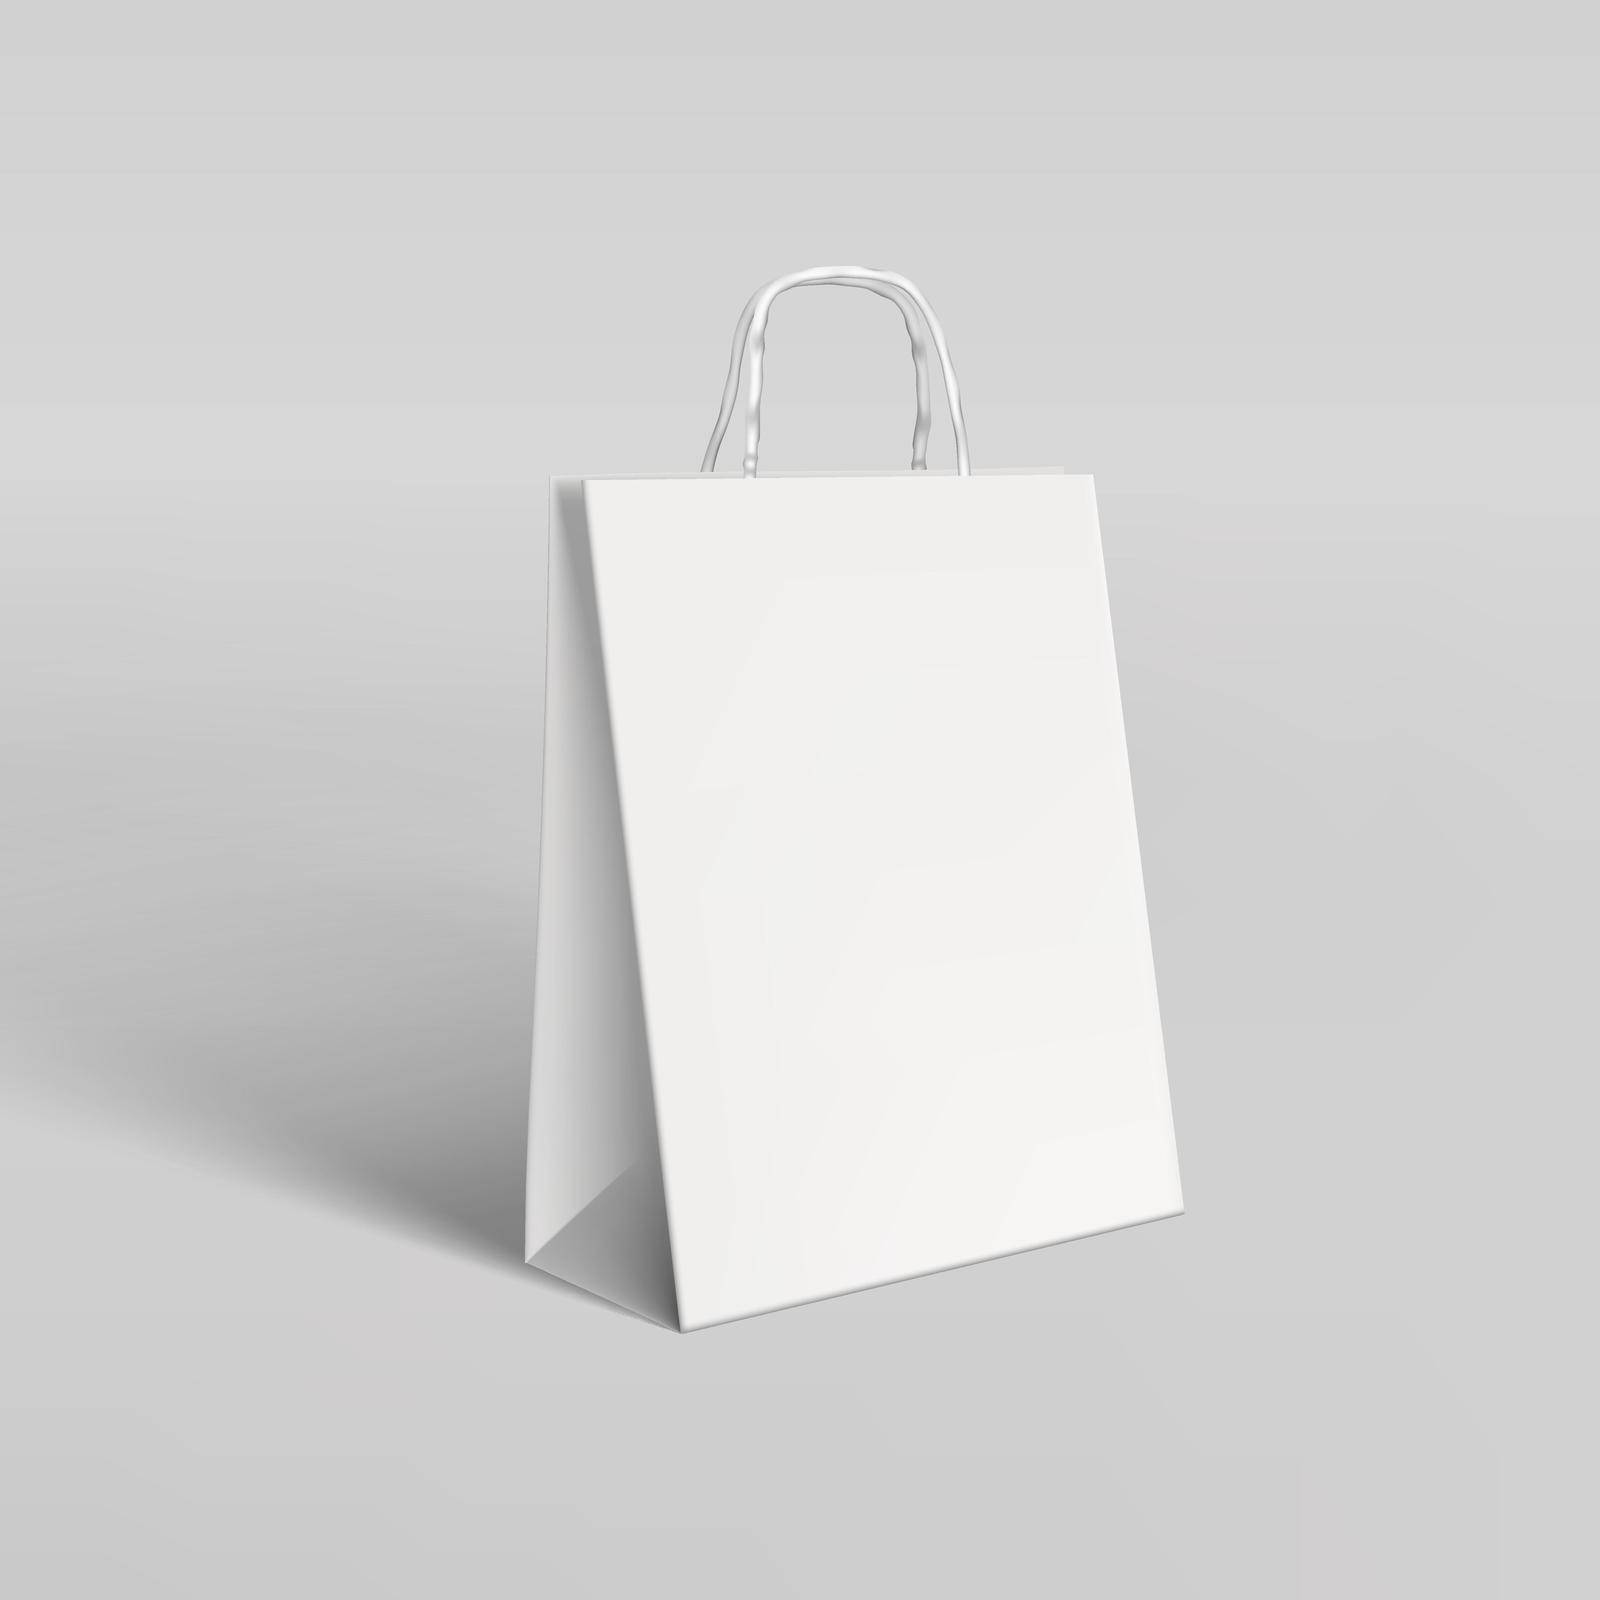 3D Paper Bag With Shadow For Branding by VectorThings